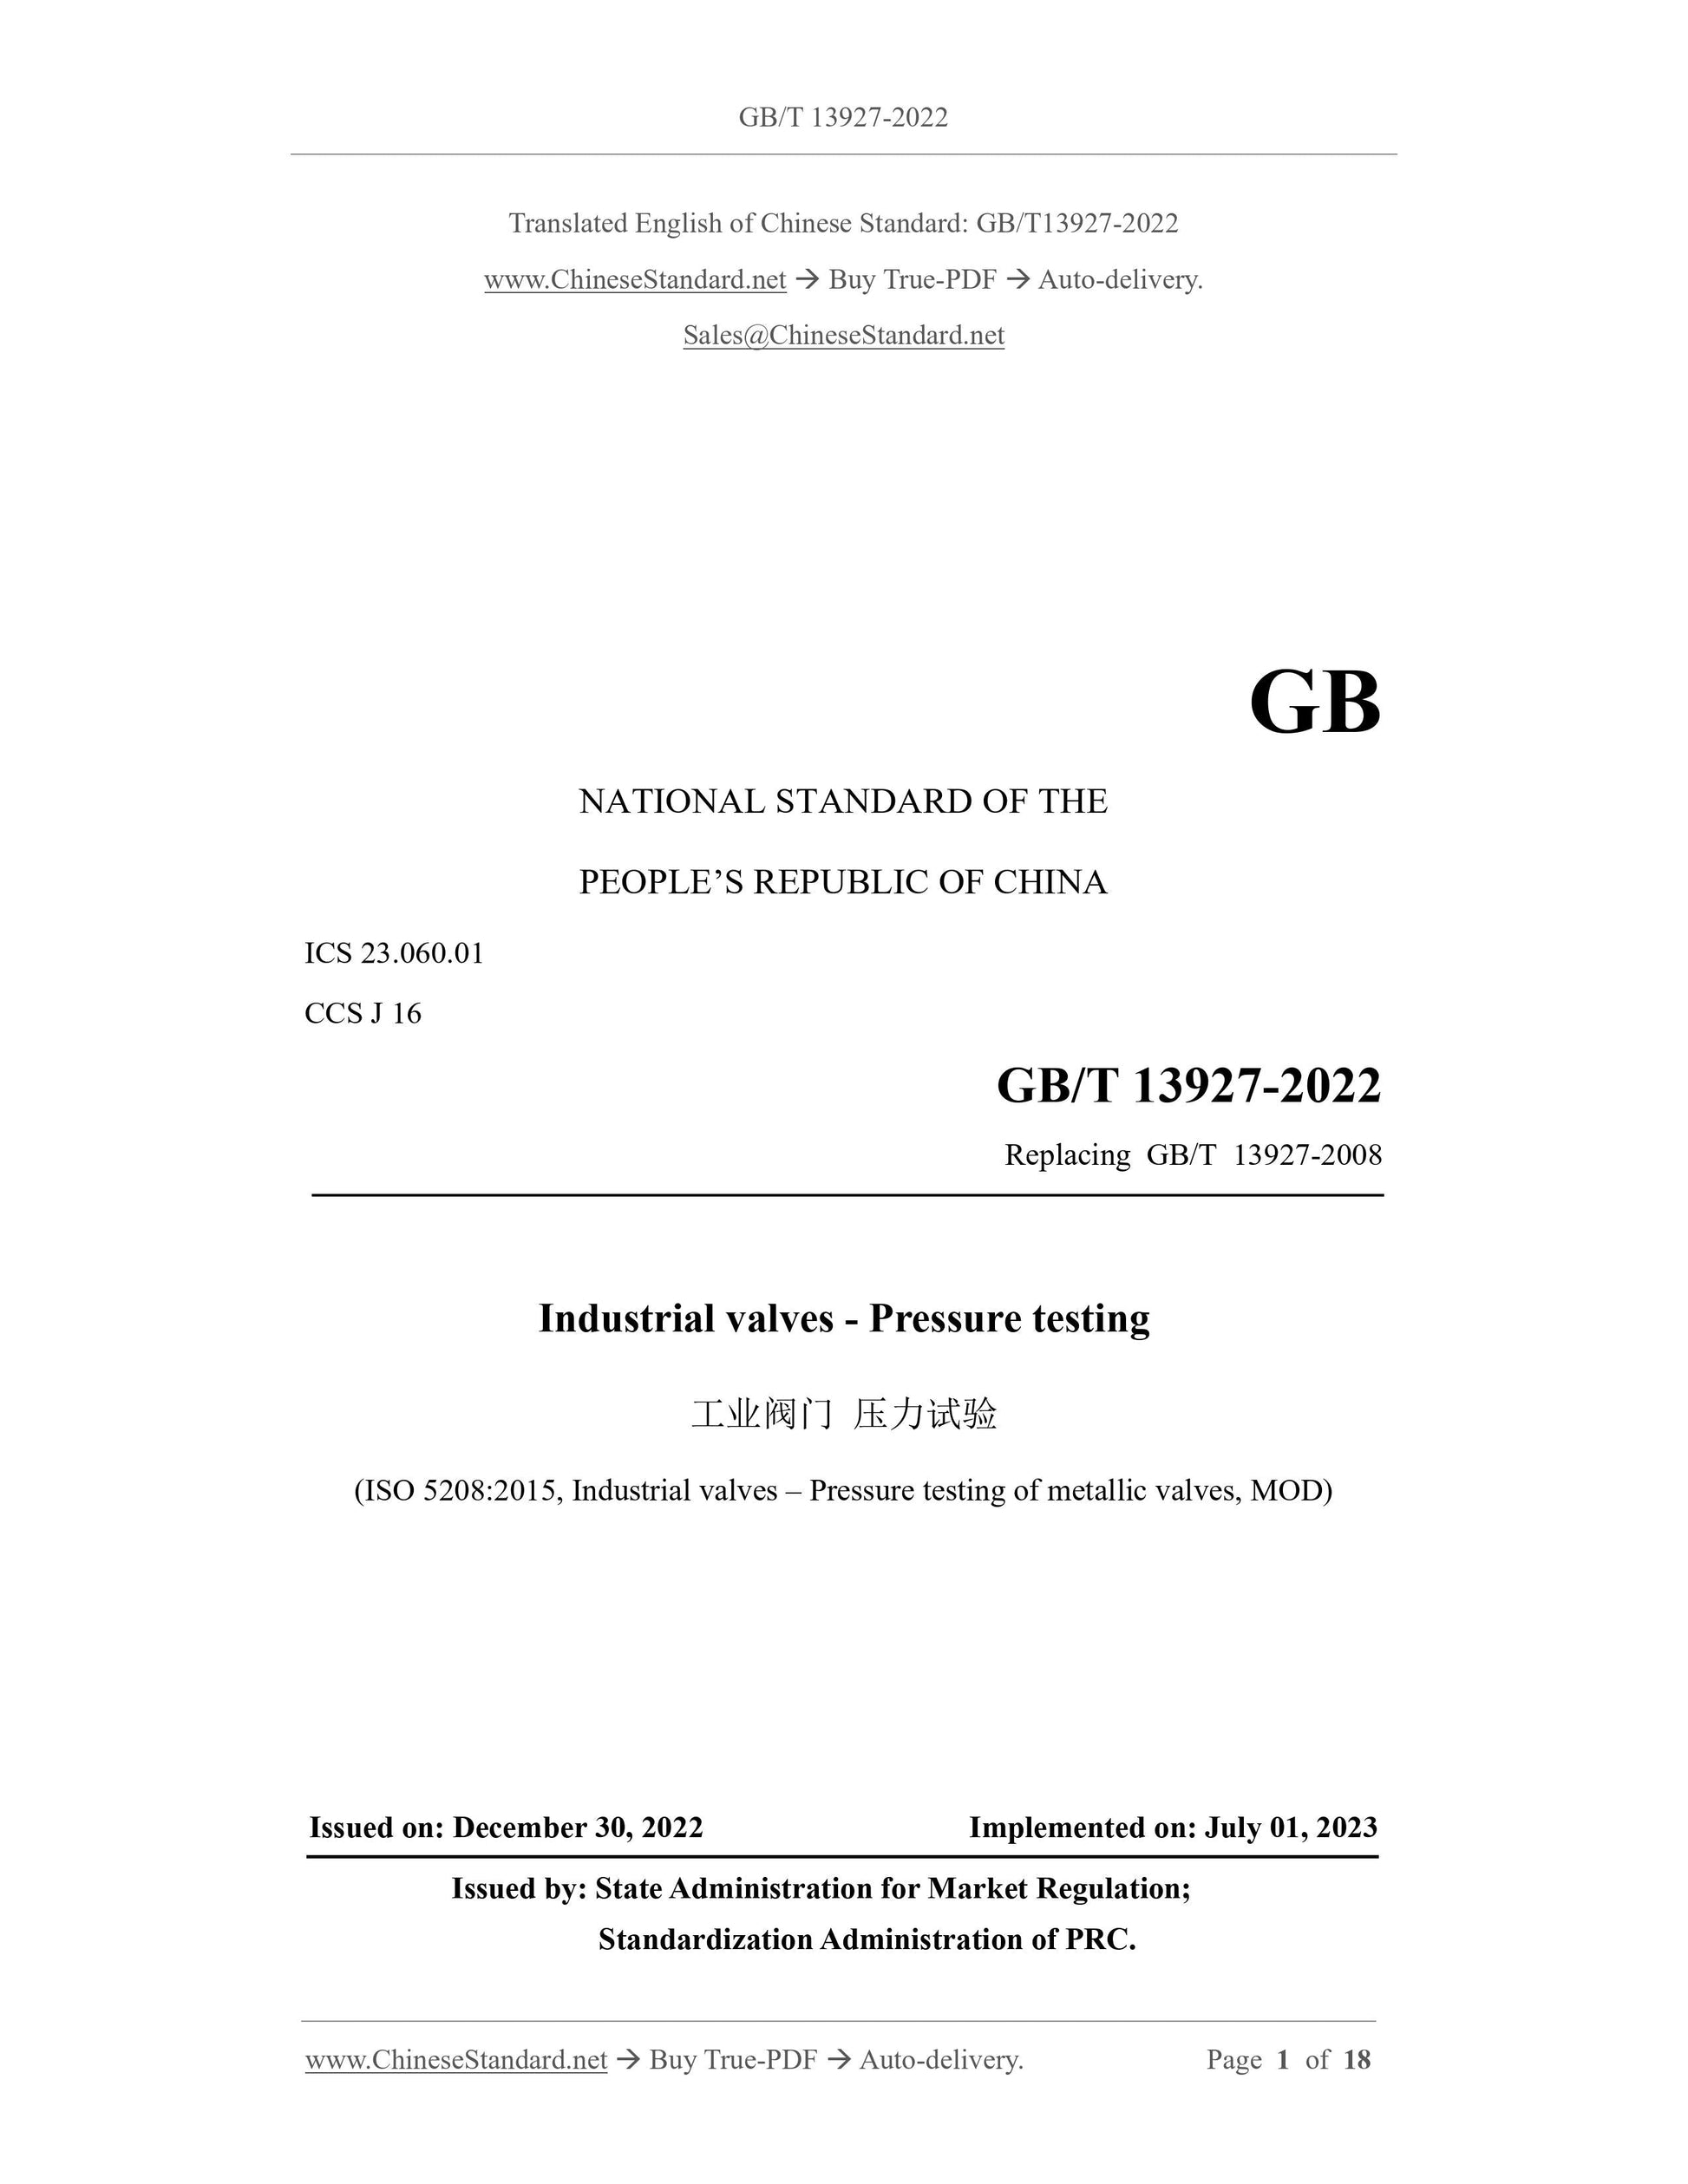 GB/T 13927-2022 Page 1